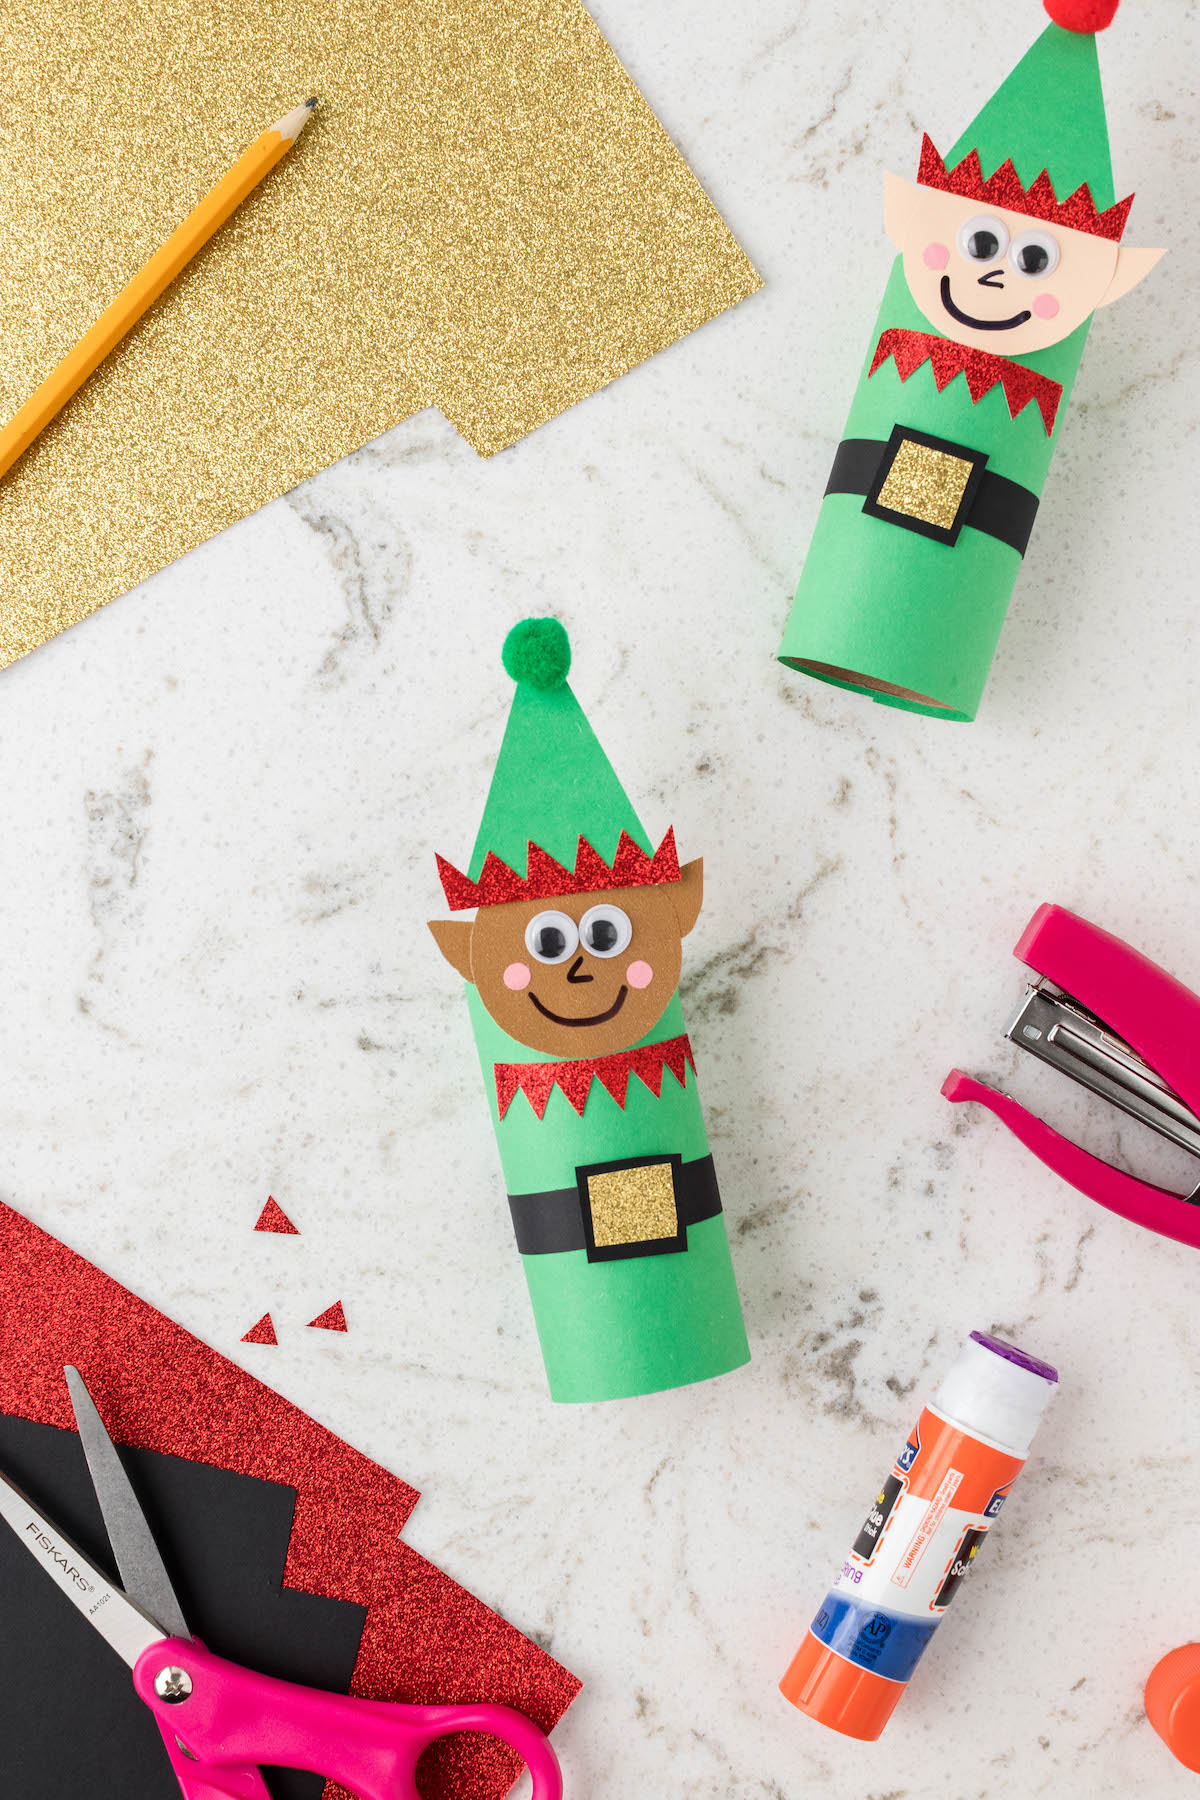 completed elf craft made out of toilet paper roll